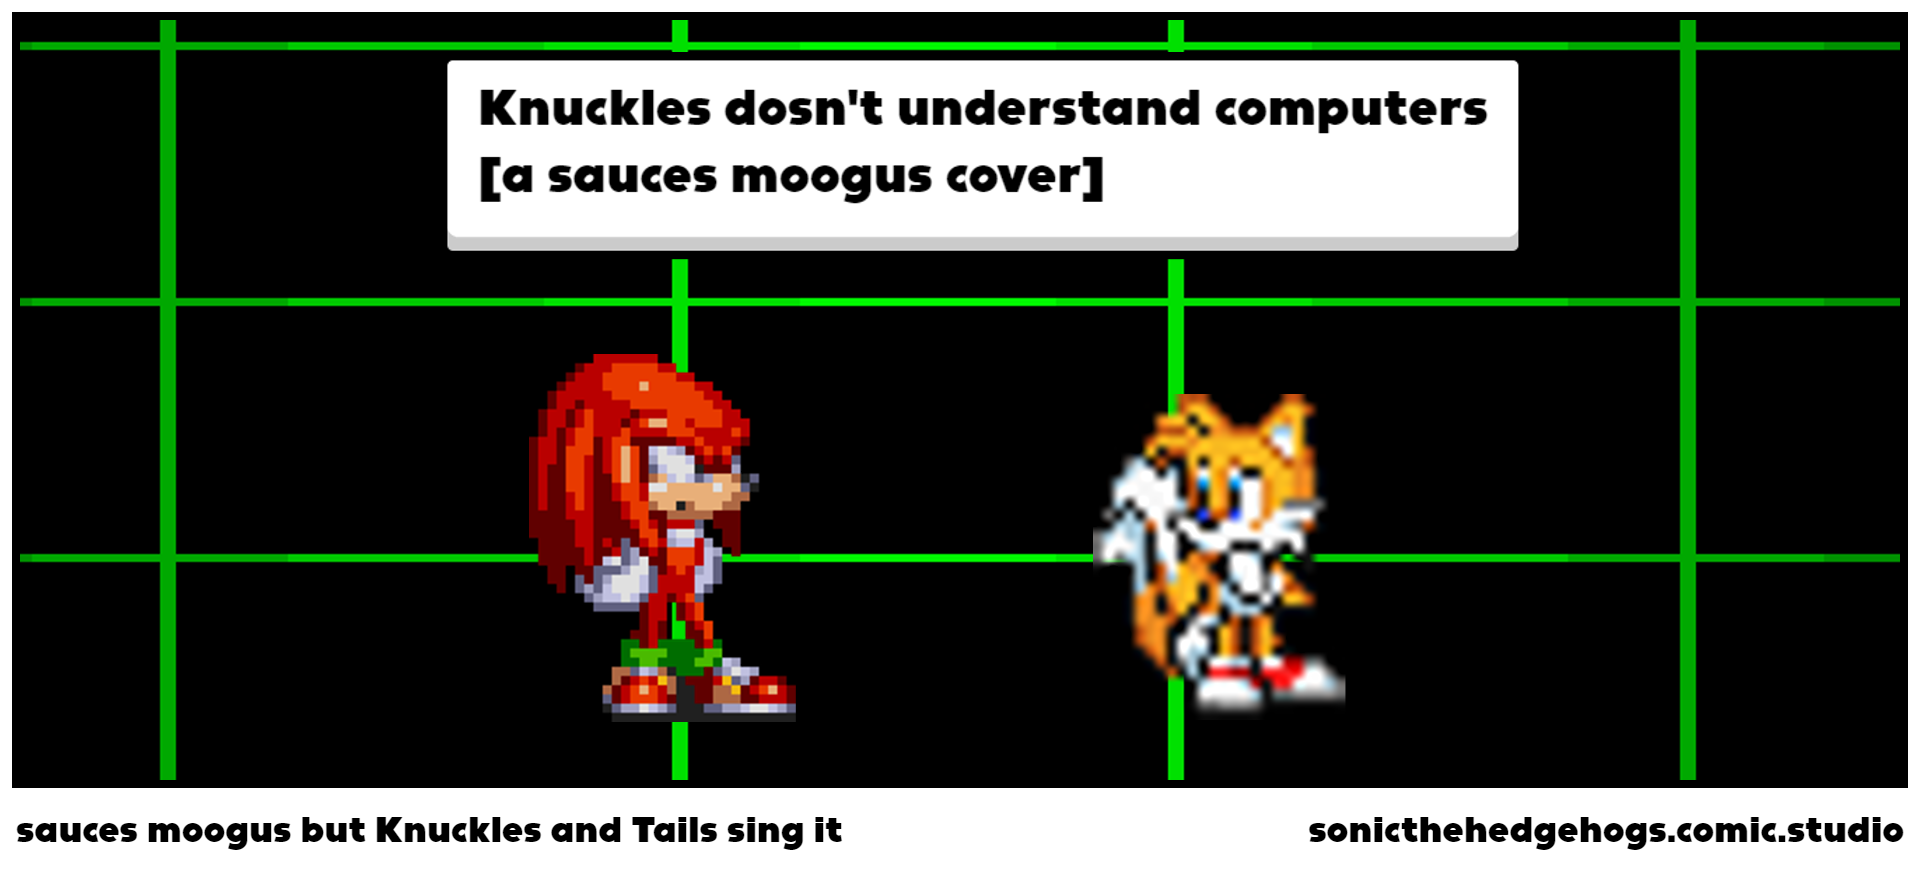 sauces moogus but Knuckles and Tails sing it